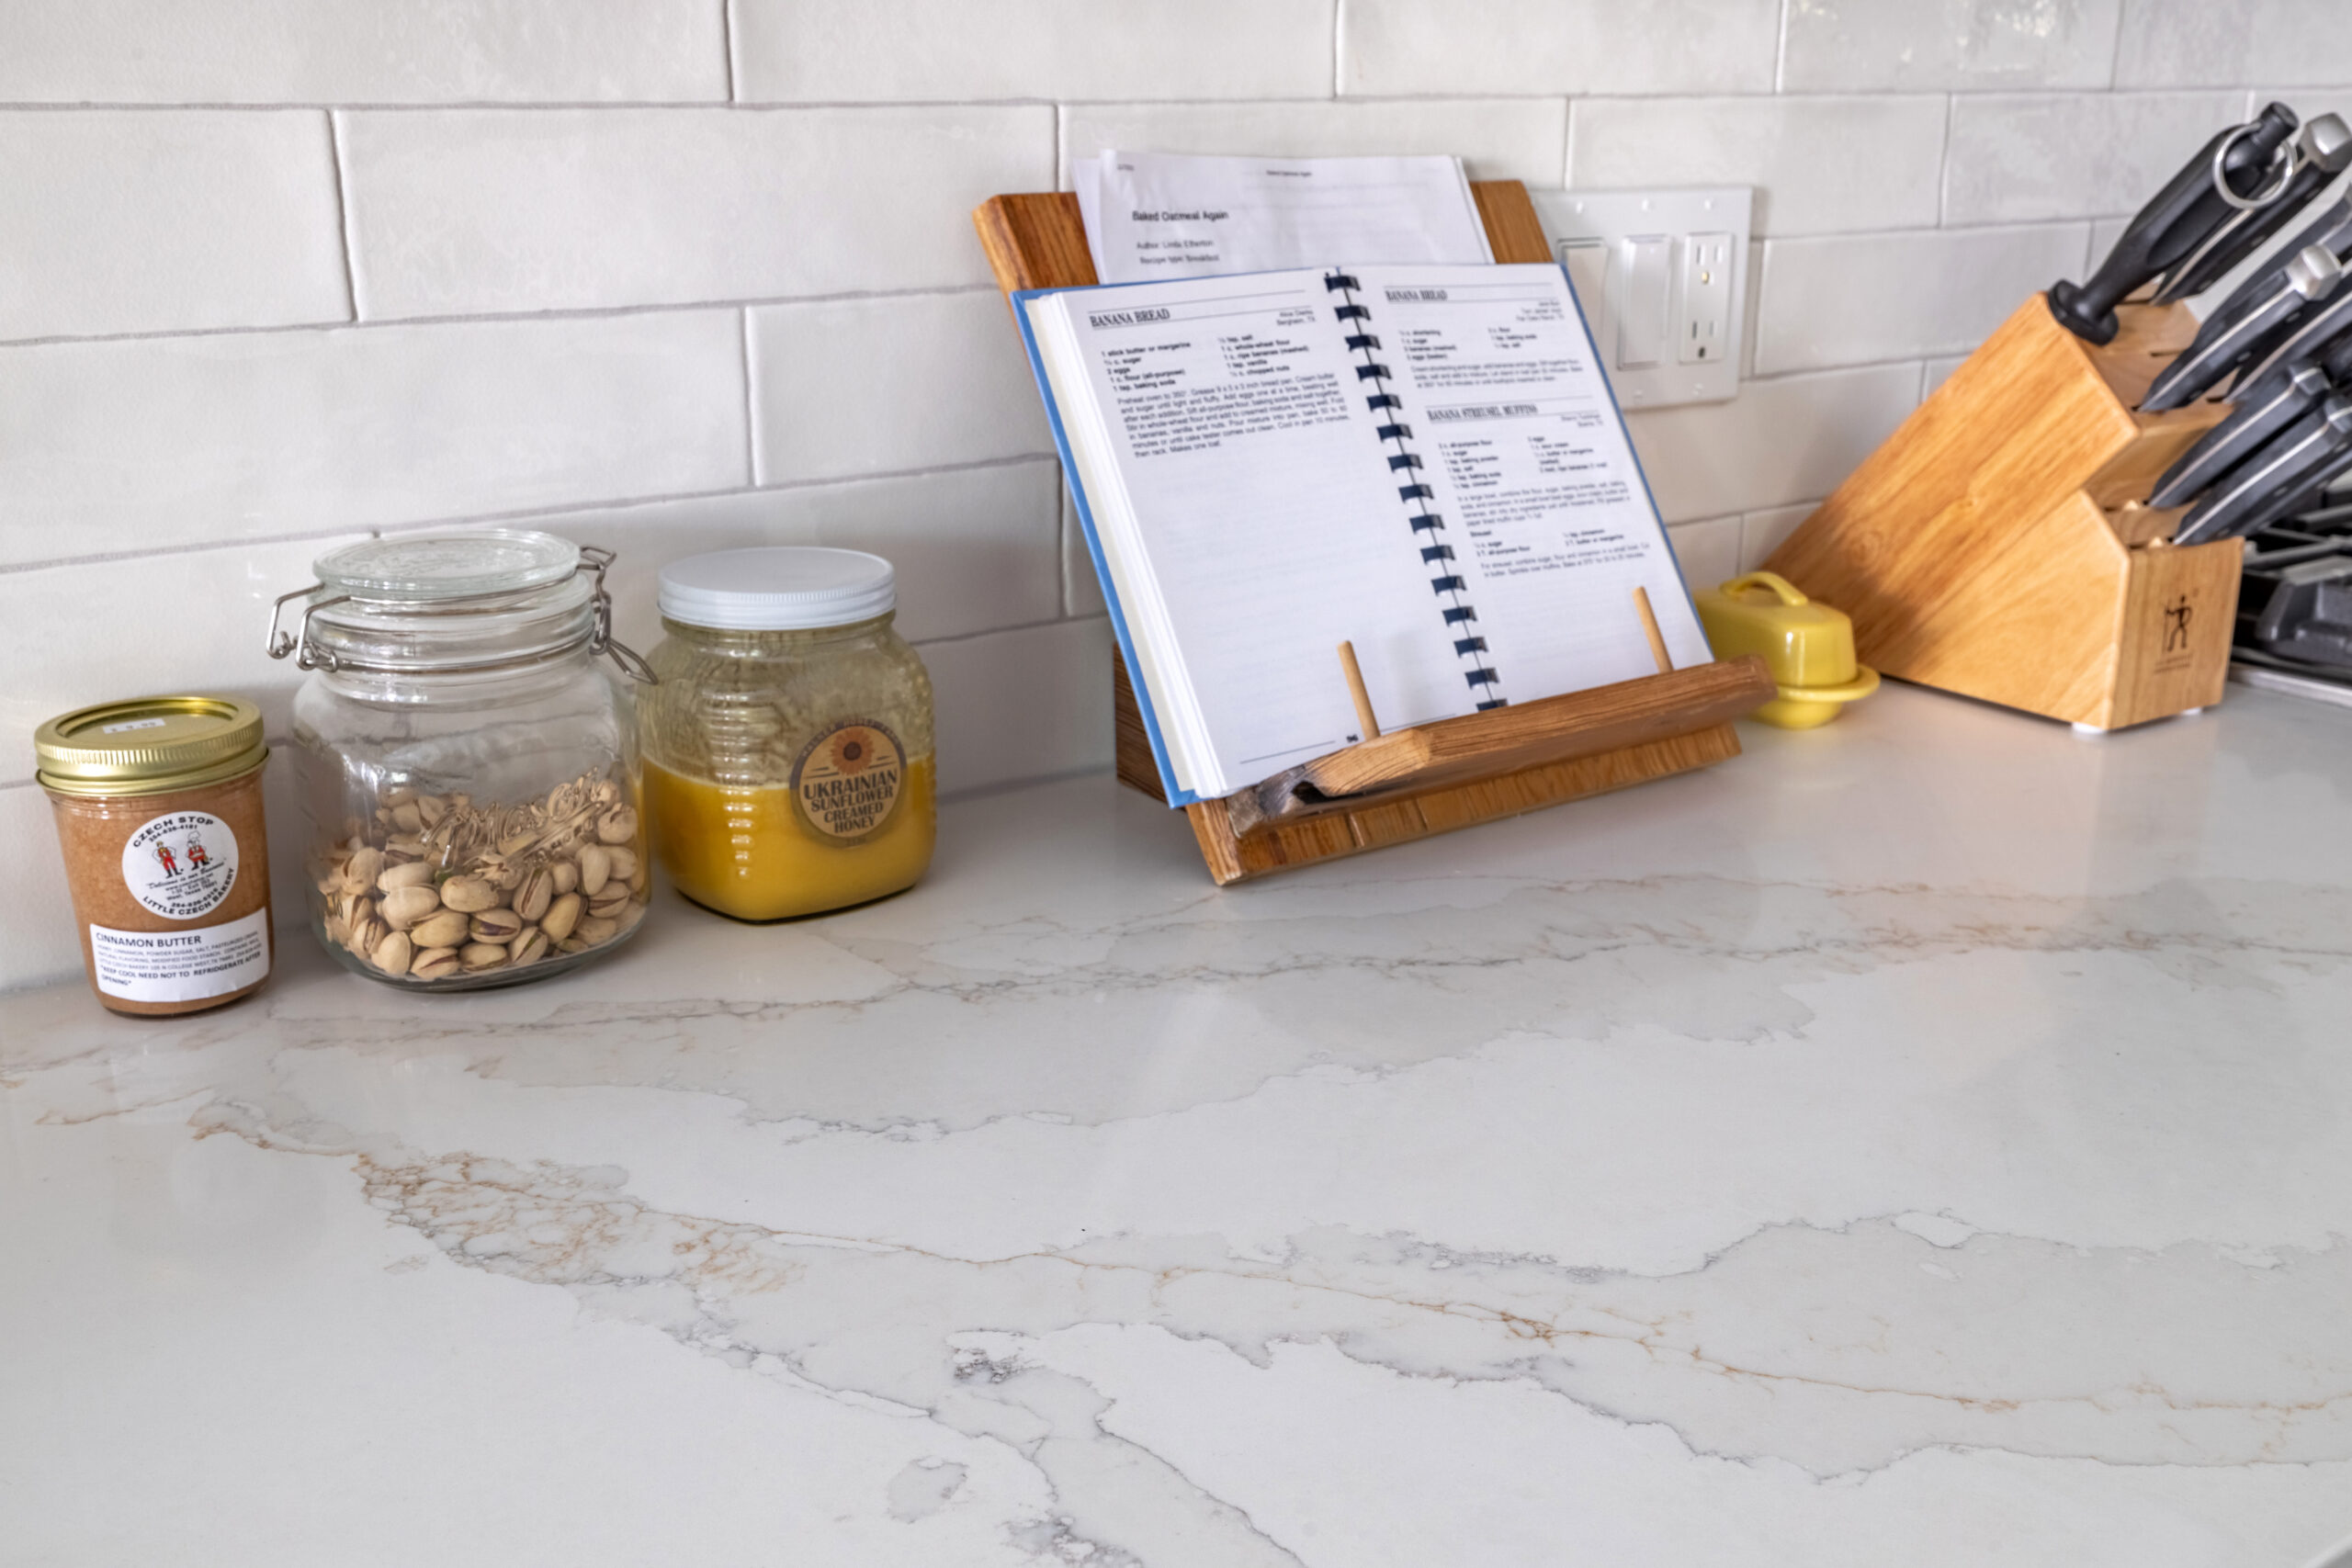 This kitchen features a white countertop with grey and gold veins. There is an open book, jars, a butter holder and a knife set resting on the countertop against the white-tiled backsplash.